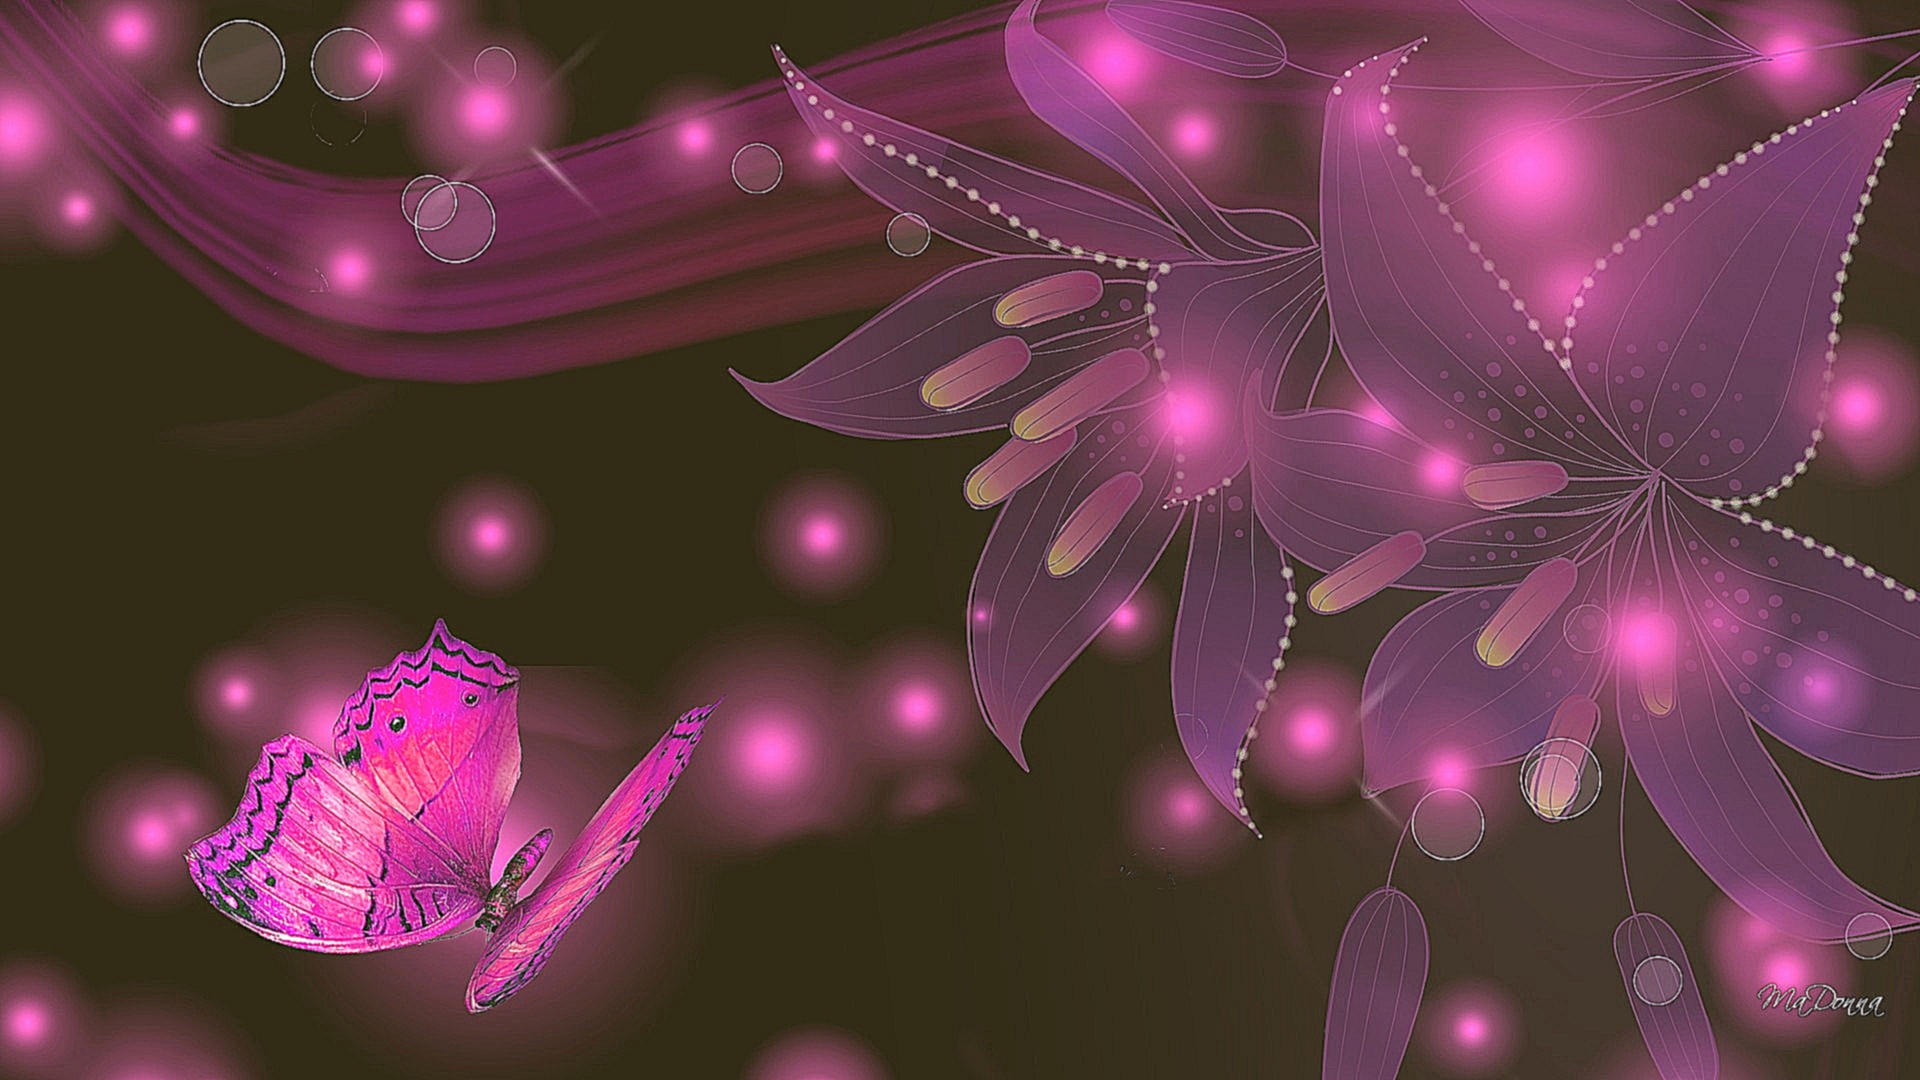 Purple And Pink Butterfly Wallpaper With High Resolution 1920x1080 px